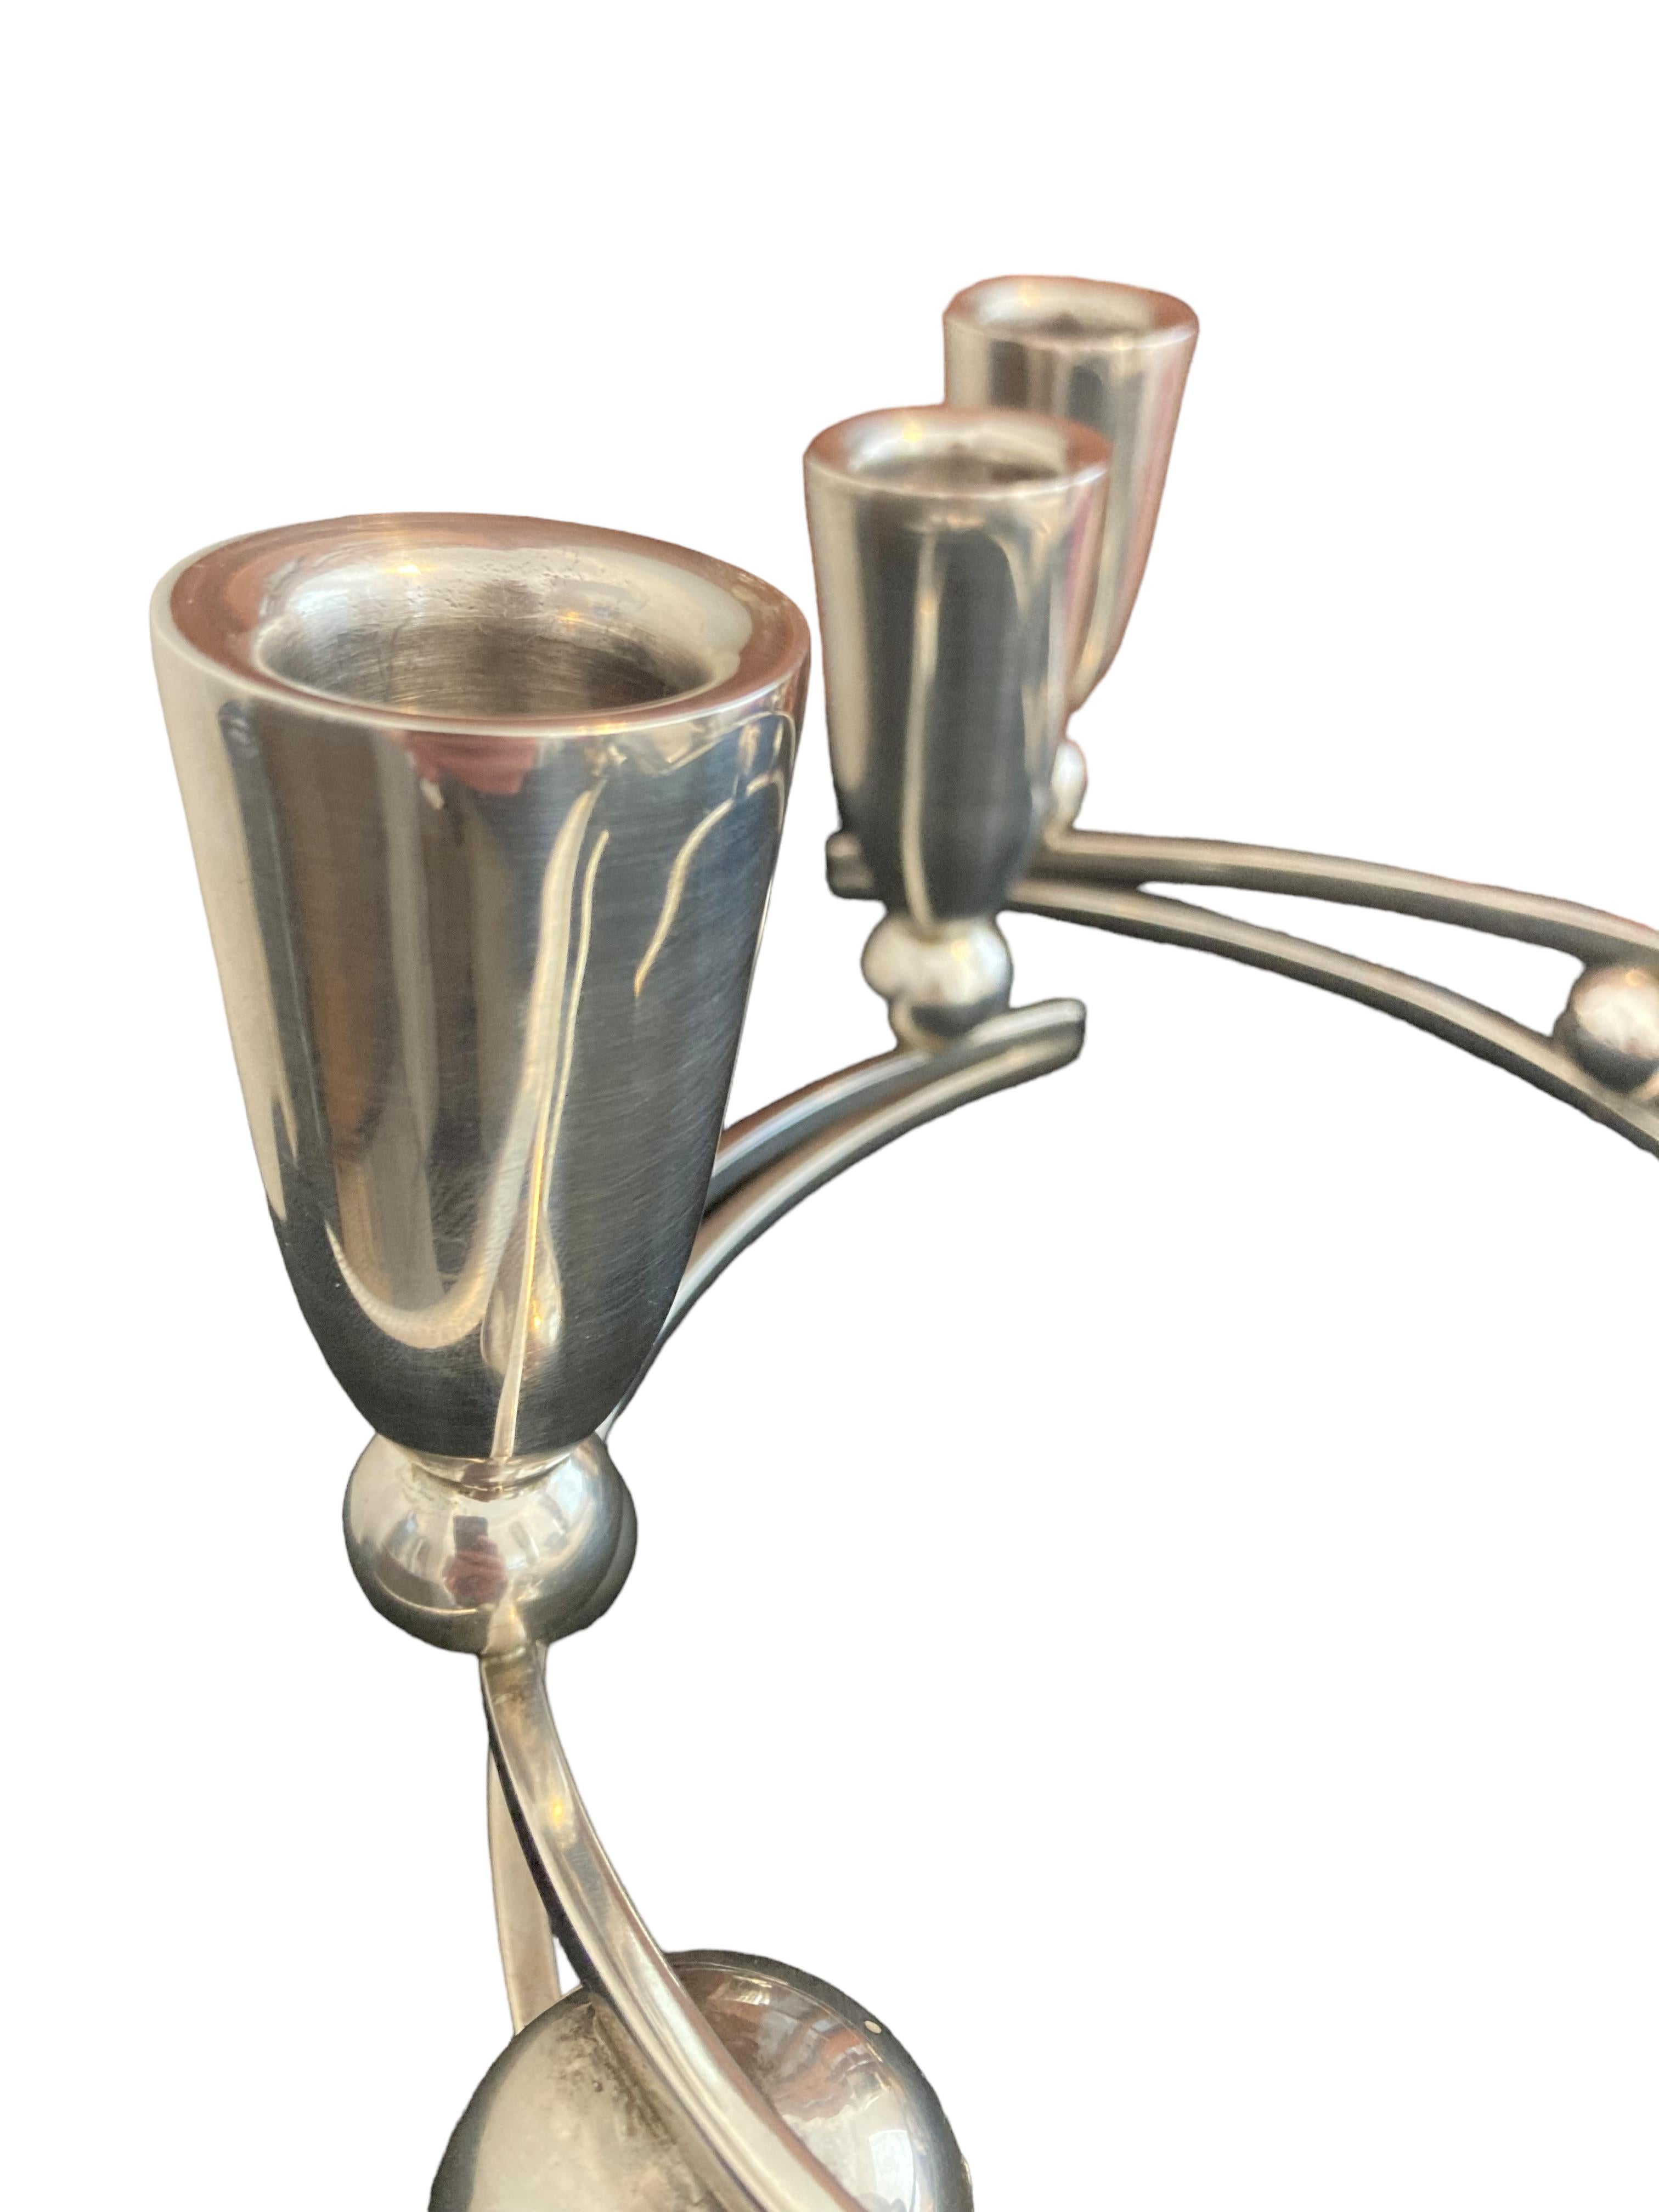 Hand-Crafted Mid-Century Modern P Lopez Sterling Candelabra Candlesticks, Mexico, circa 1950